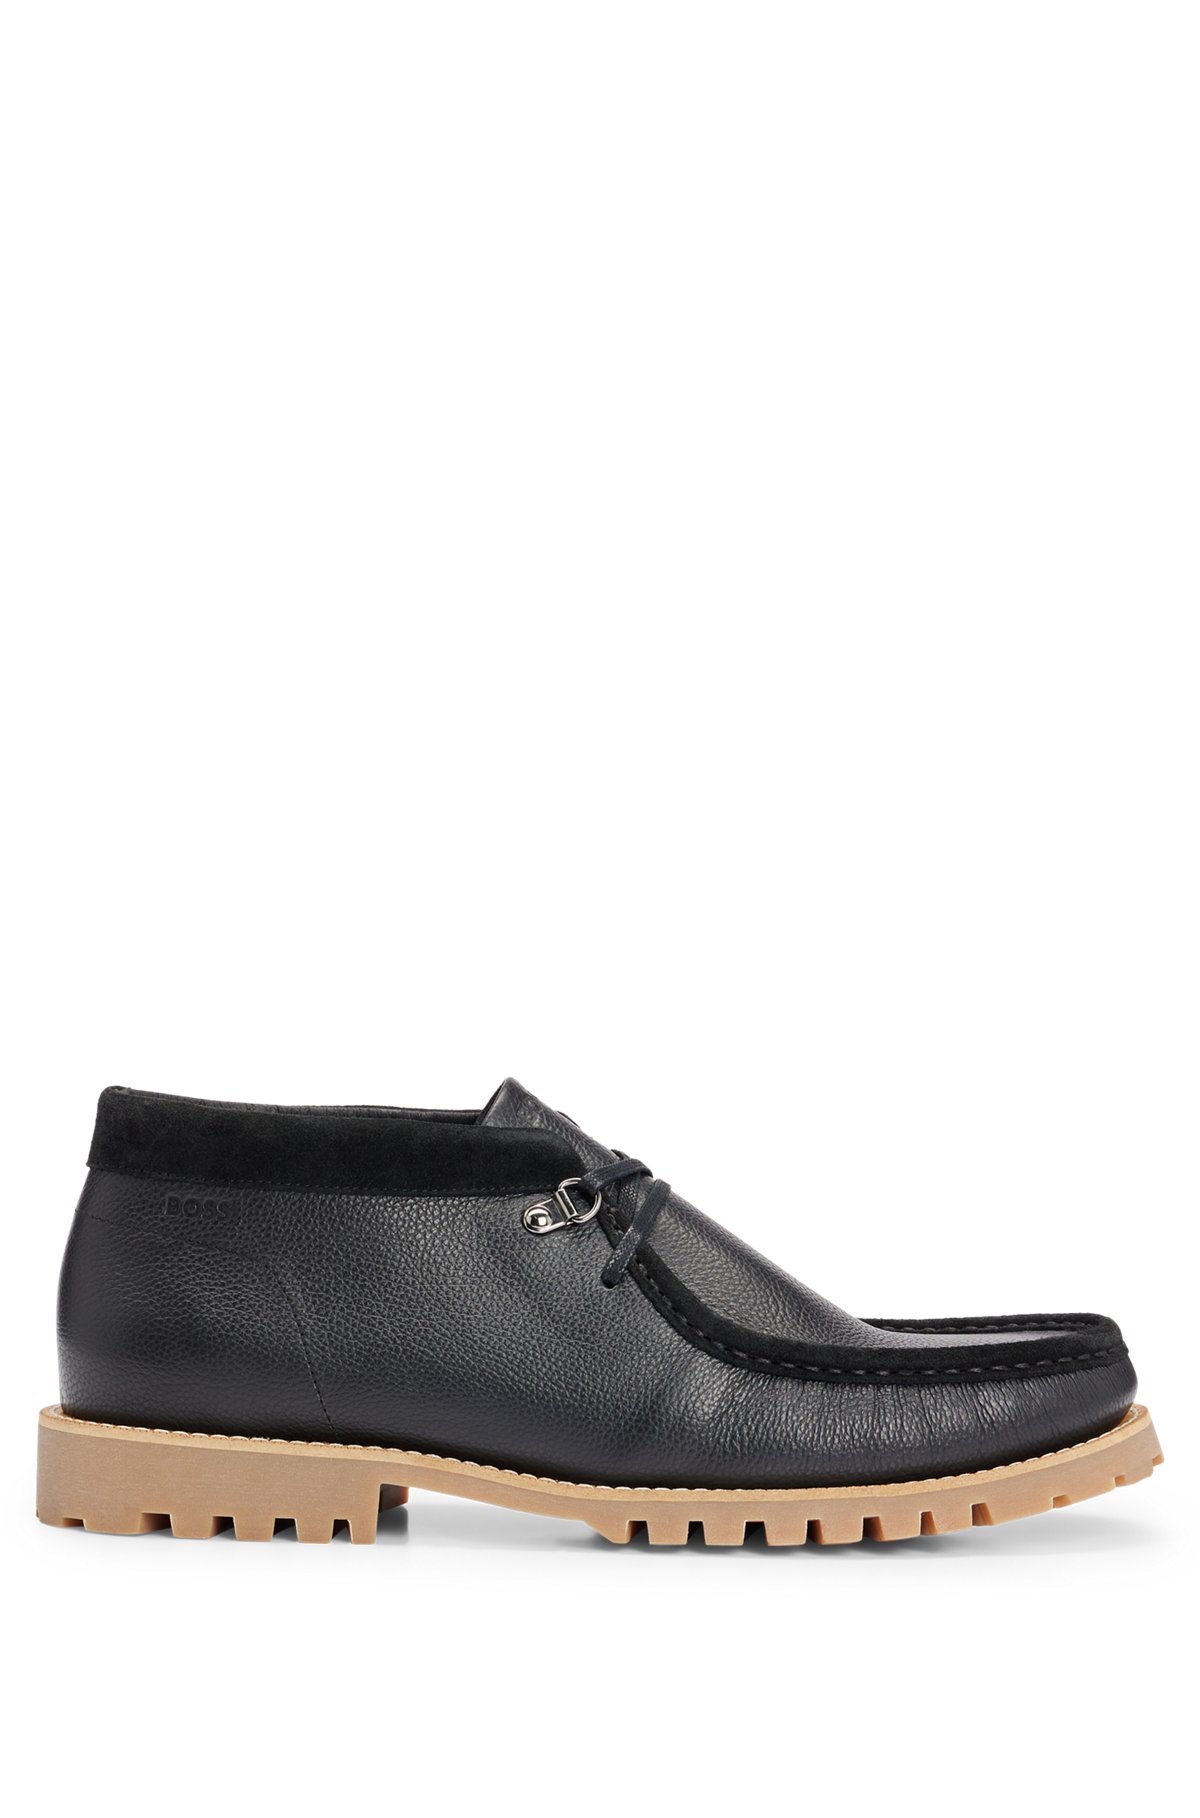 Grained-leather desert boots with rubber-lug outsole, Black